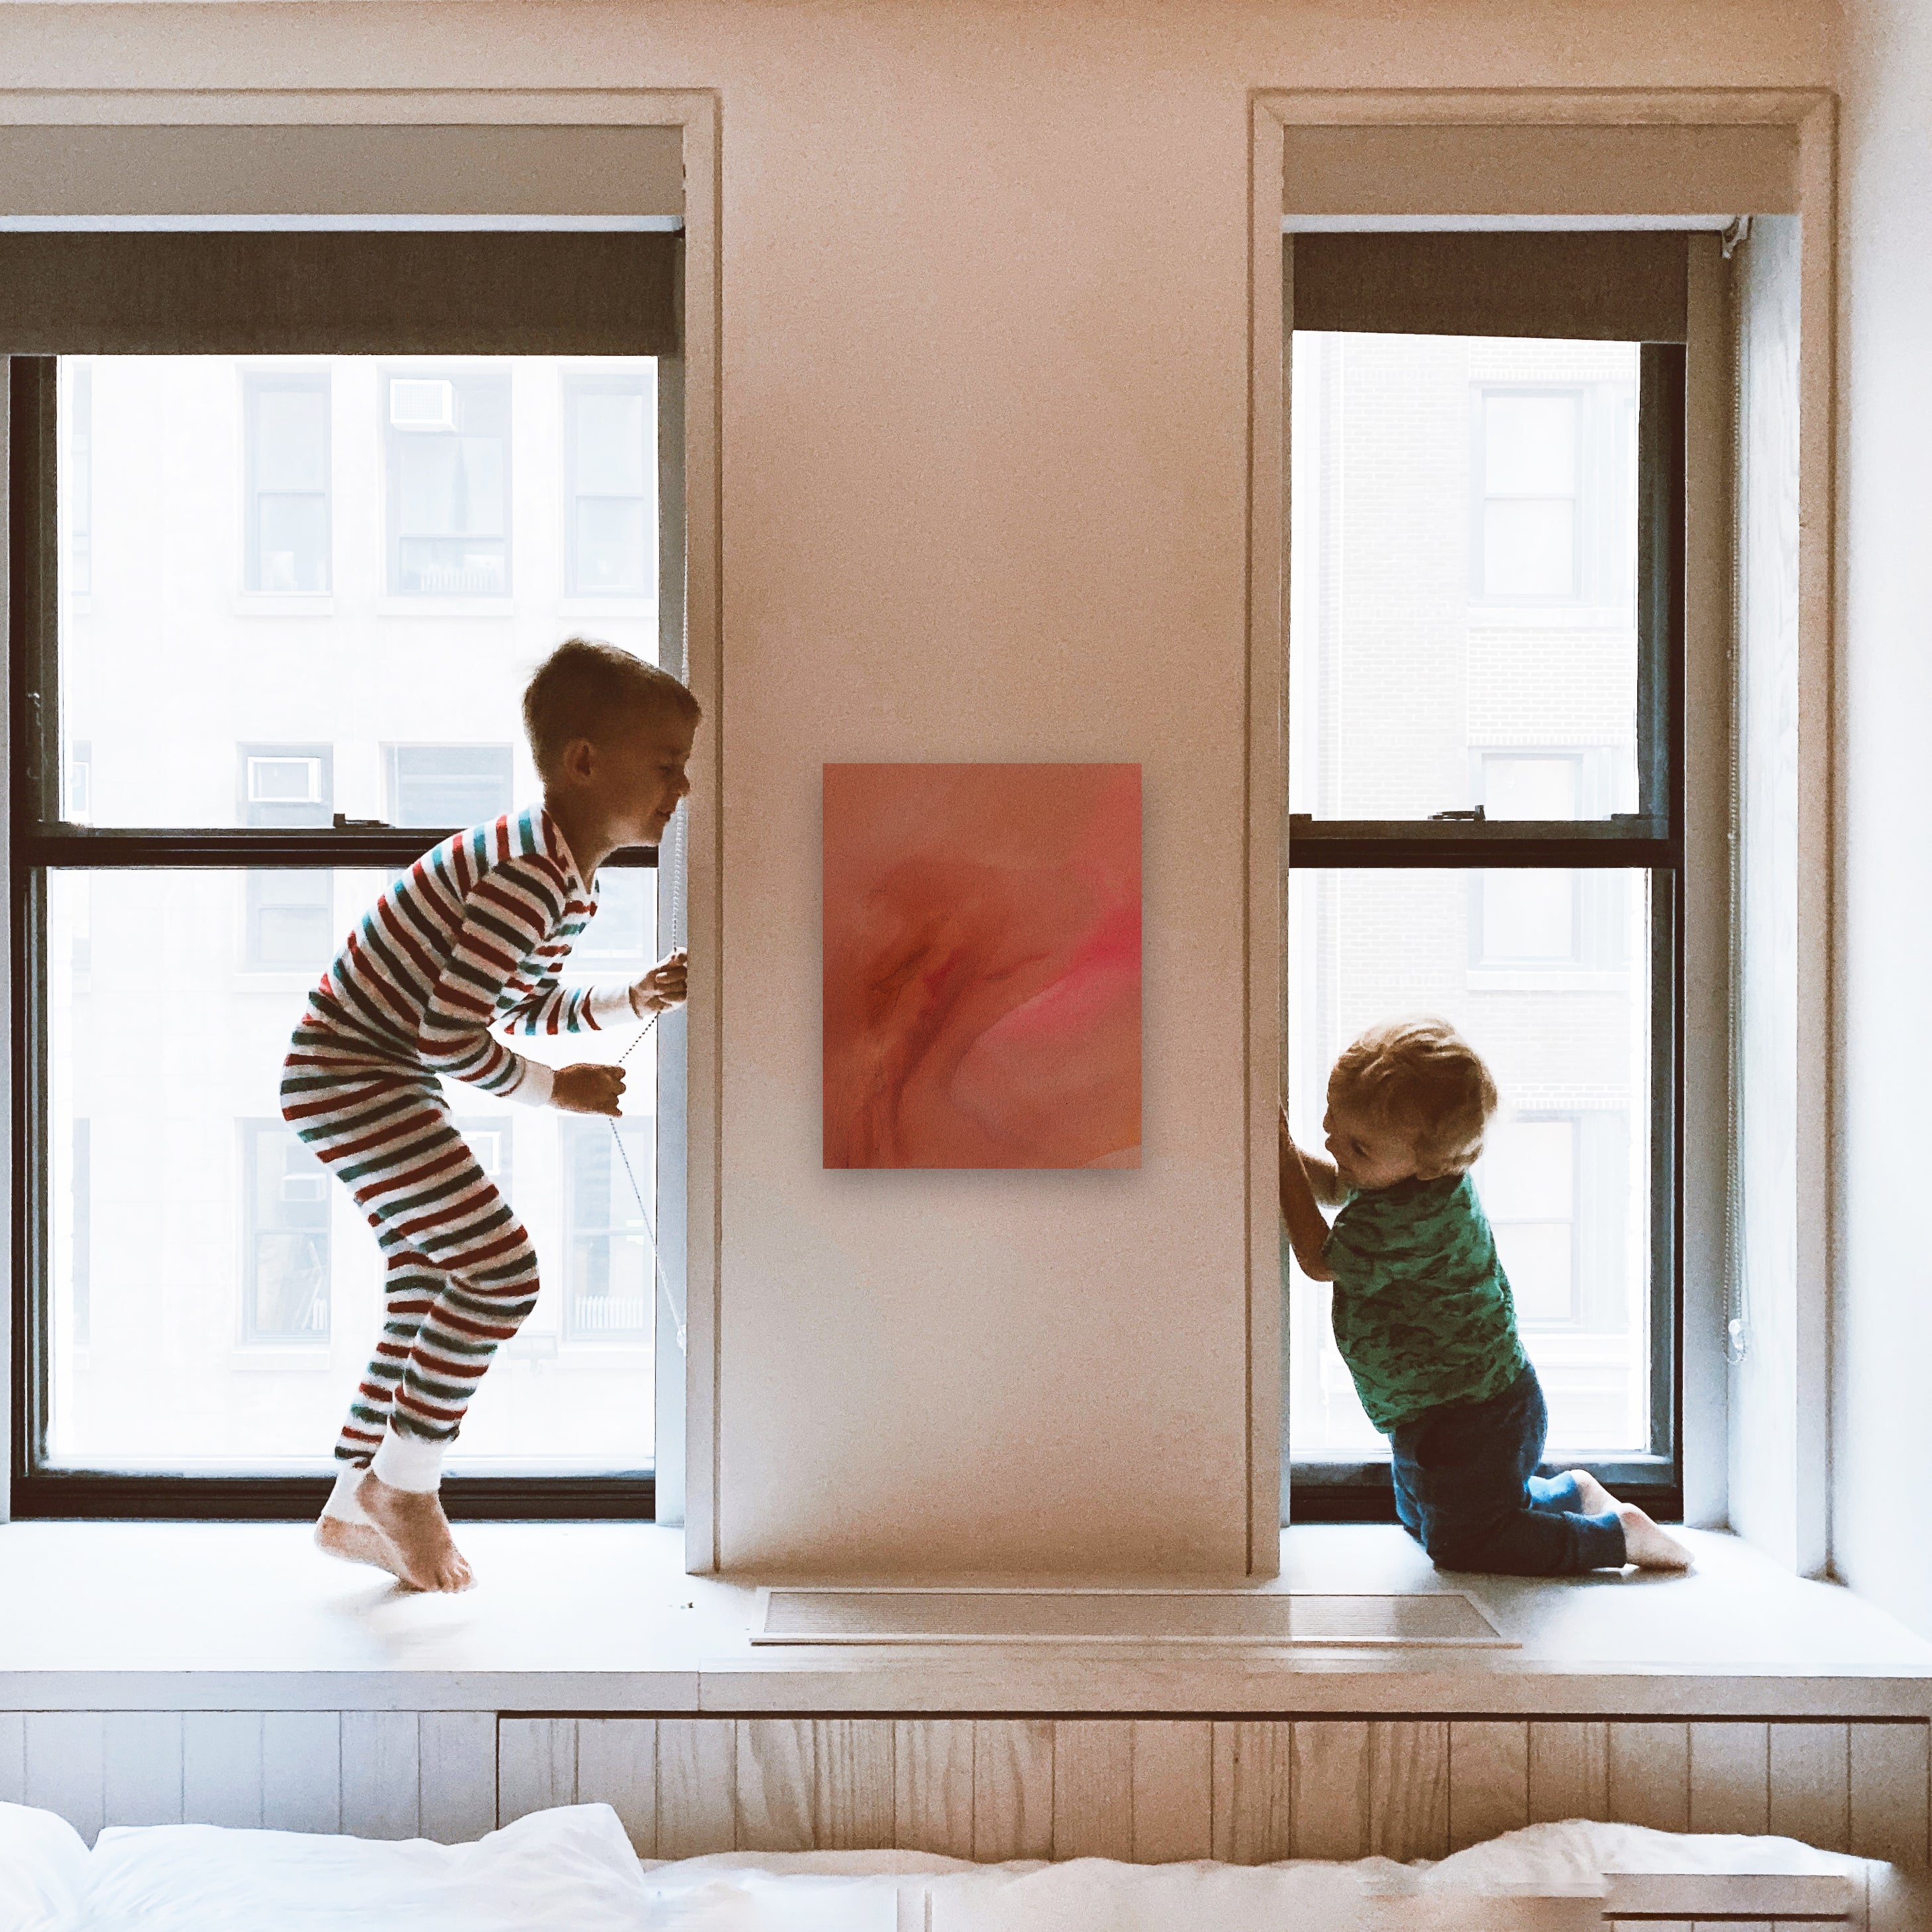 Small pink and orange abstract painting hangs on a wall between two children playing.